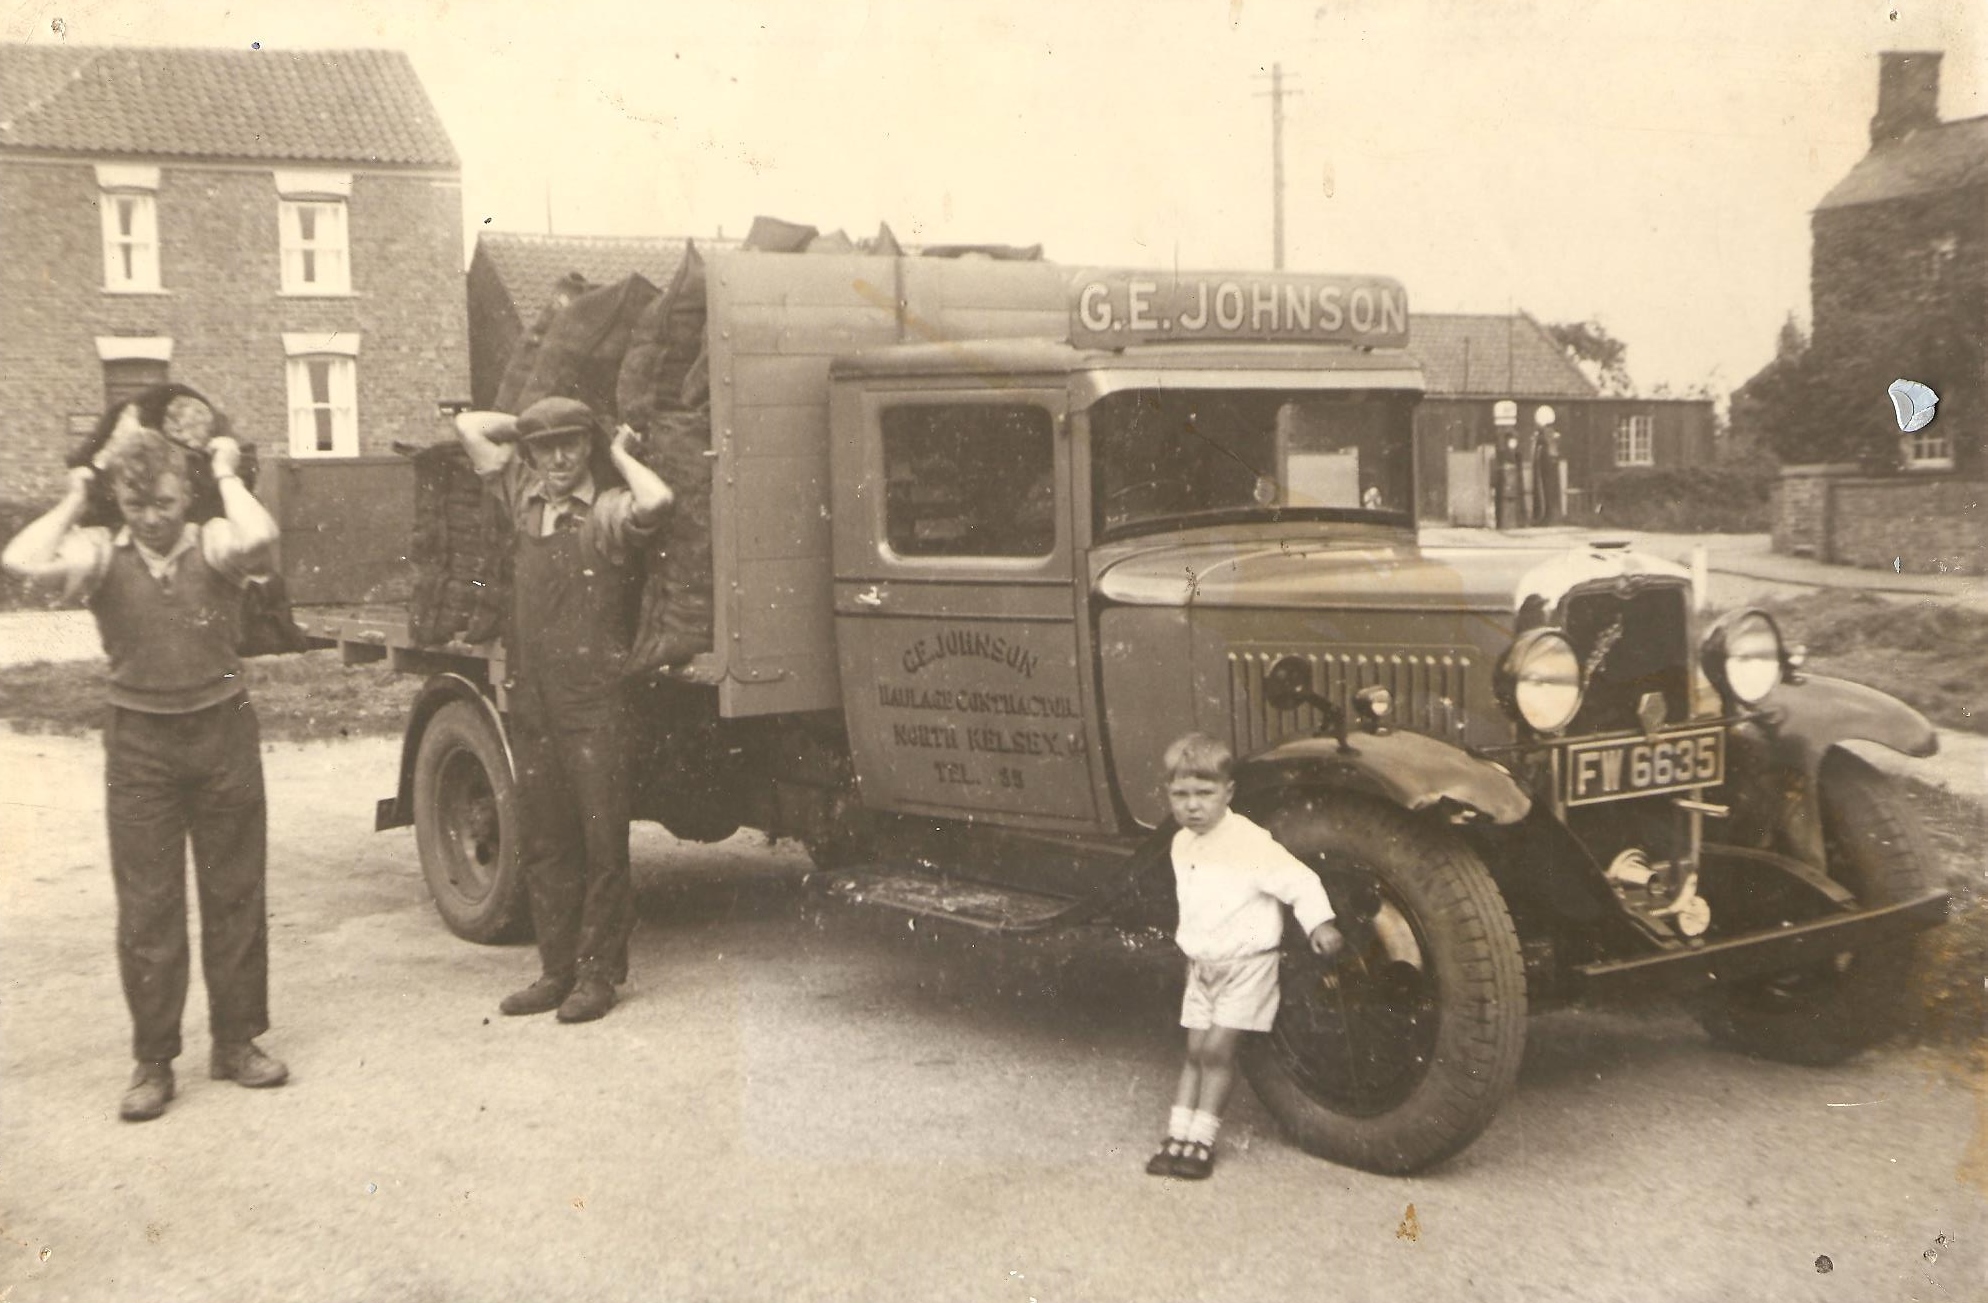 From left to right: George Johnson, Arthur Johnson and Cliff Johnson (aged 5) in 1935